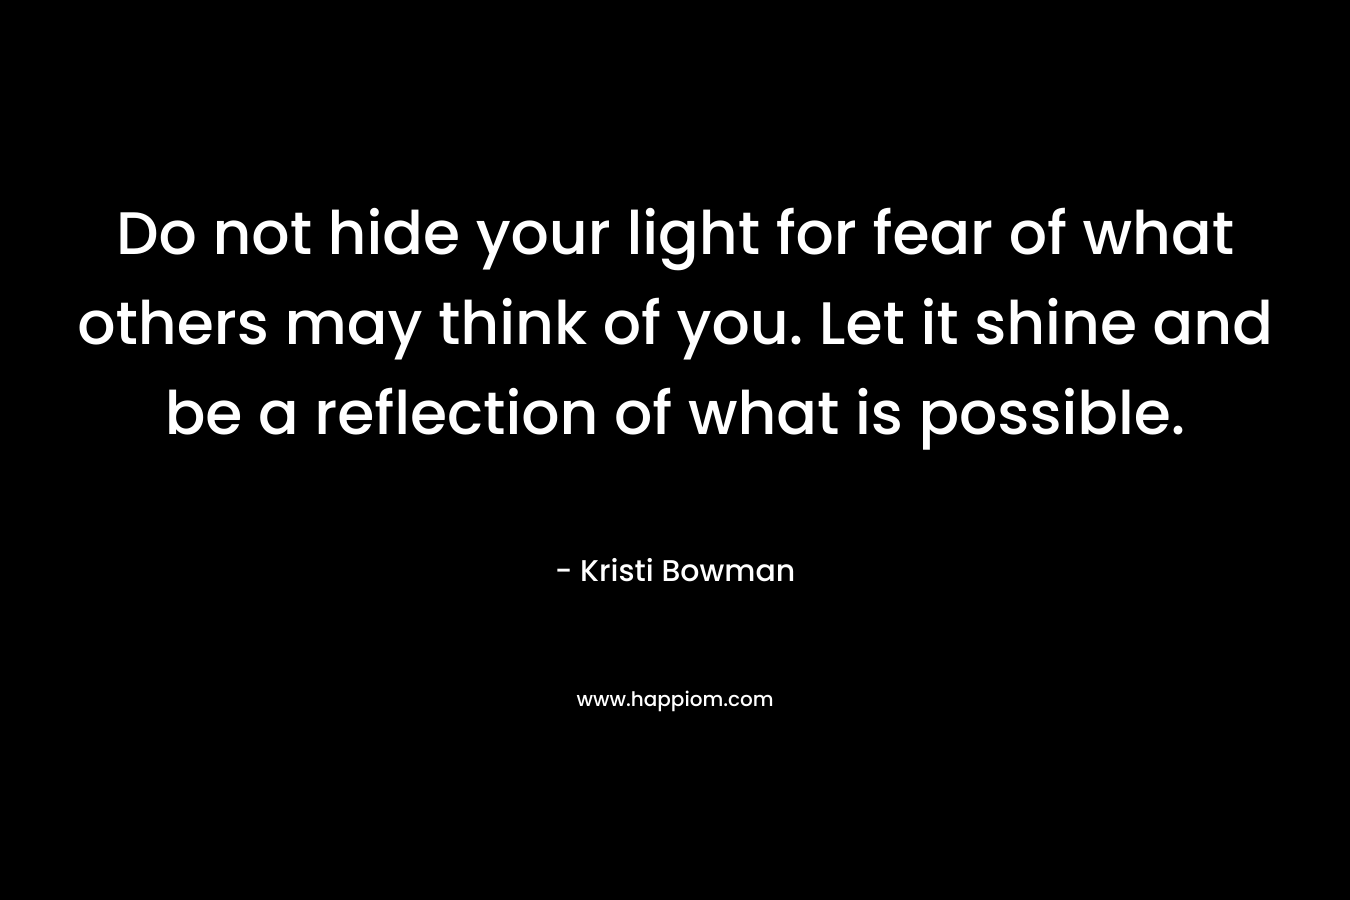 Do not hide your light for fear of what others may think of you. Let it shine and be a reflection of what is possible.